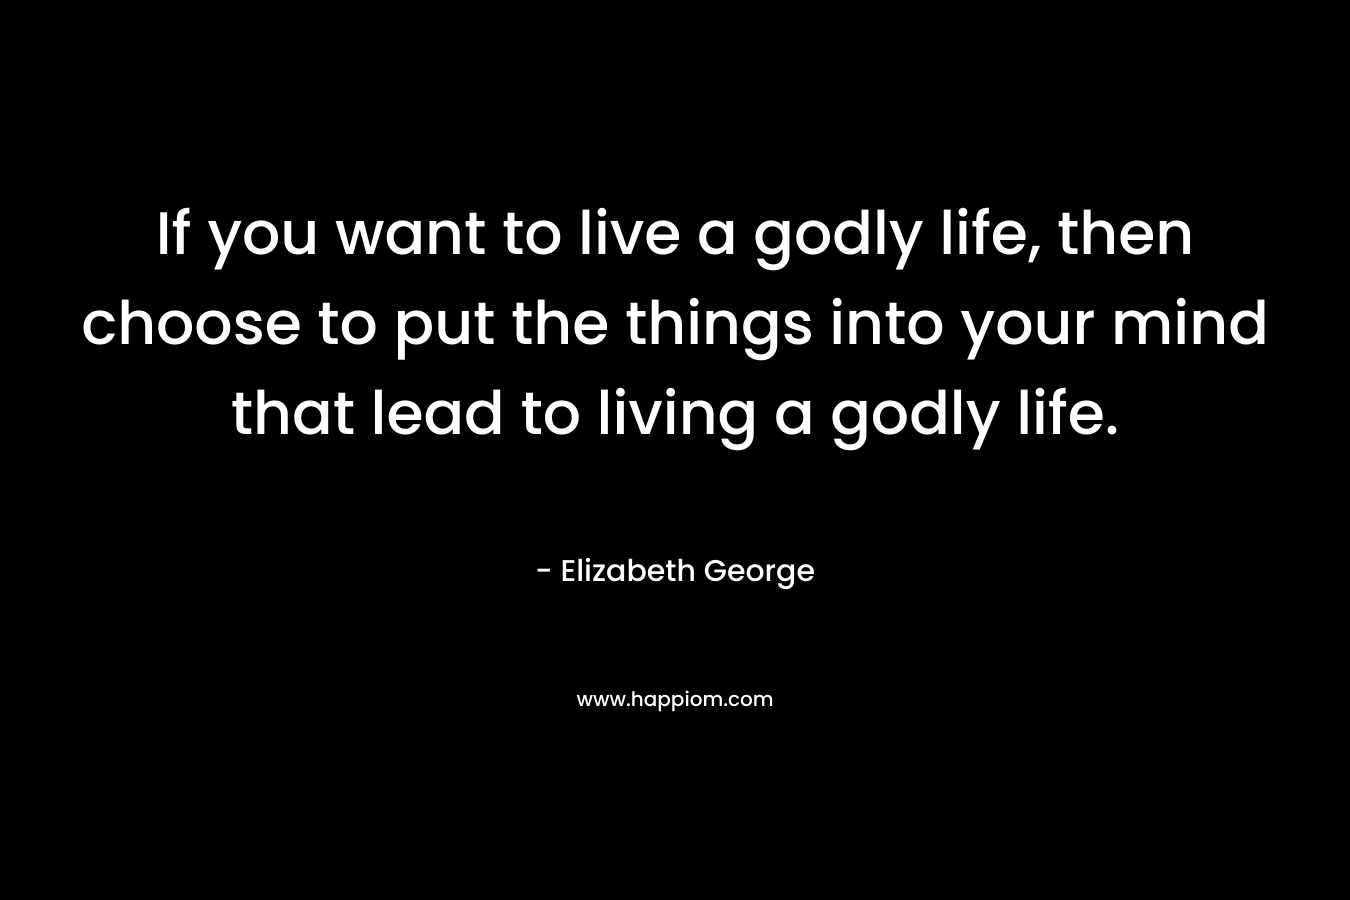 If you want to live a godly life, then choose to put the things into your mind that lead to living a godly life.